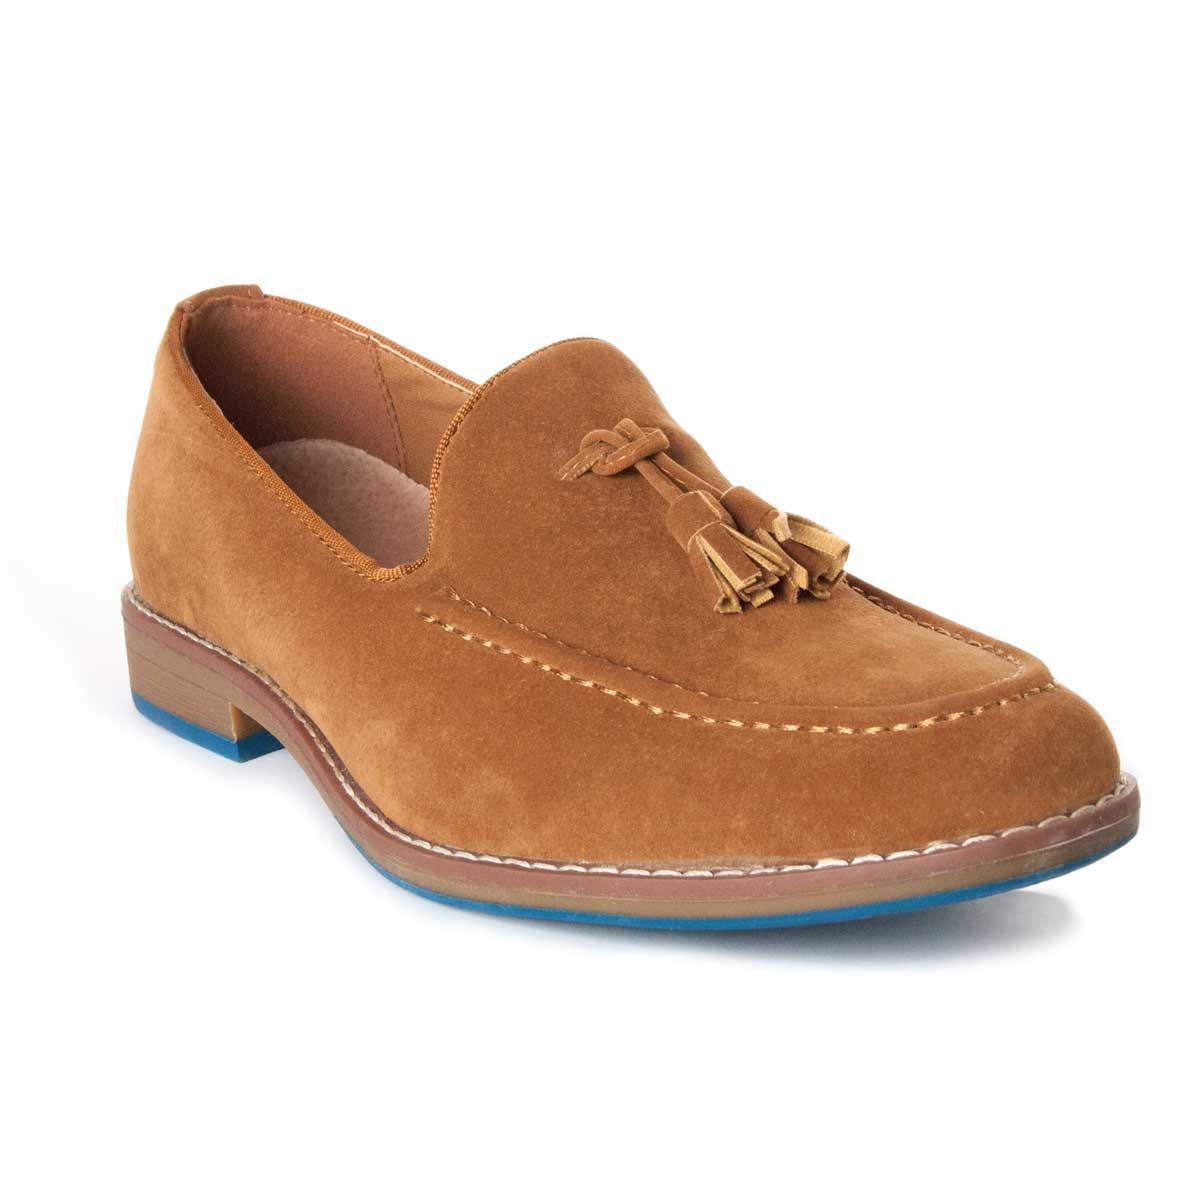 The moccasins for men, provide a current style to the closet of every gentleman. It is an elegant and British-style footwear. In short, the Oxford is the gentleman's footwear par excellence that can not be missing in any closet as it combines very well with any dress, either a classic or more casual style. This shoe that we offer is an oxford without cords, with tassels, elegance is its greater detail in addition to your comfort. Anti-slip rubber outsole in blue, soft antelinary fabric, and extractable skin template.